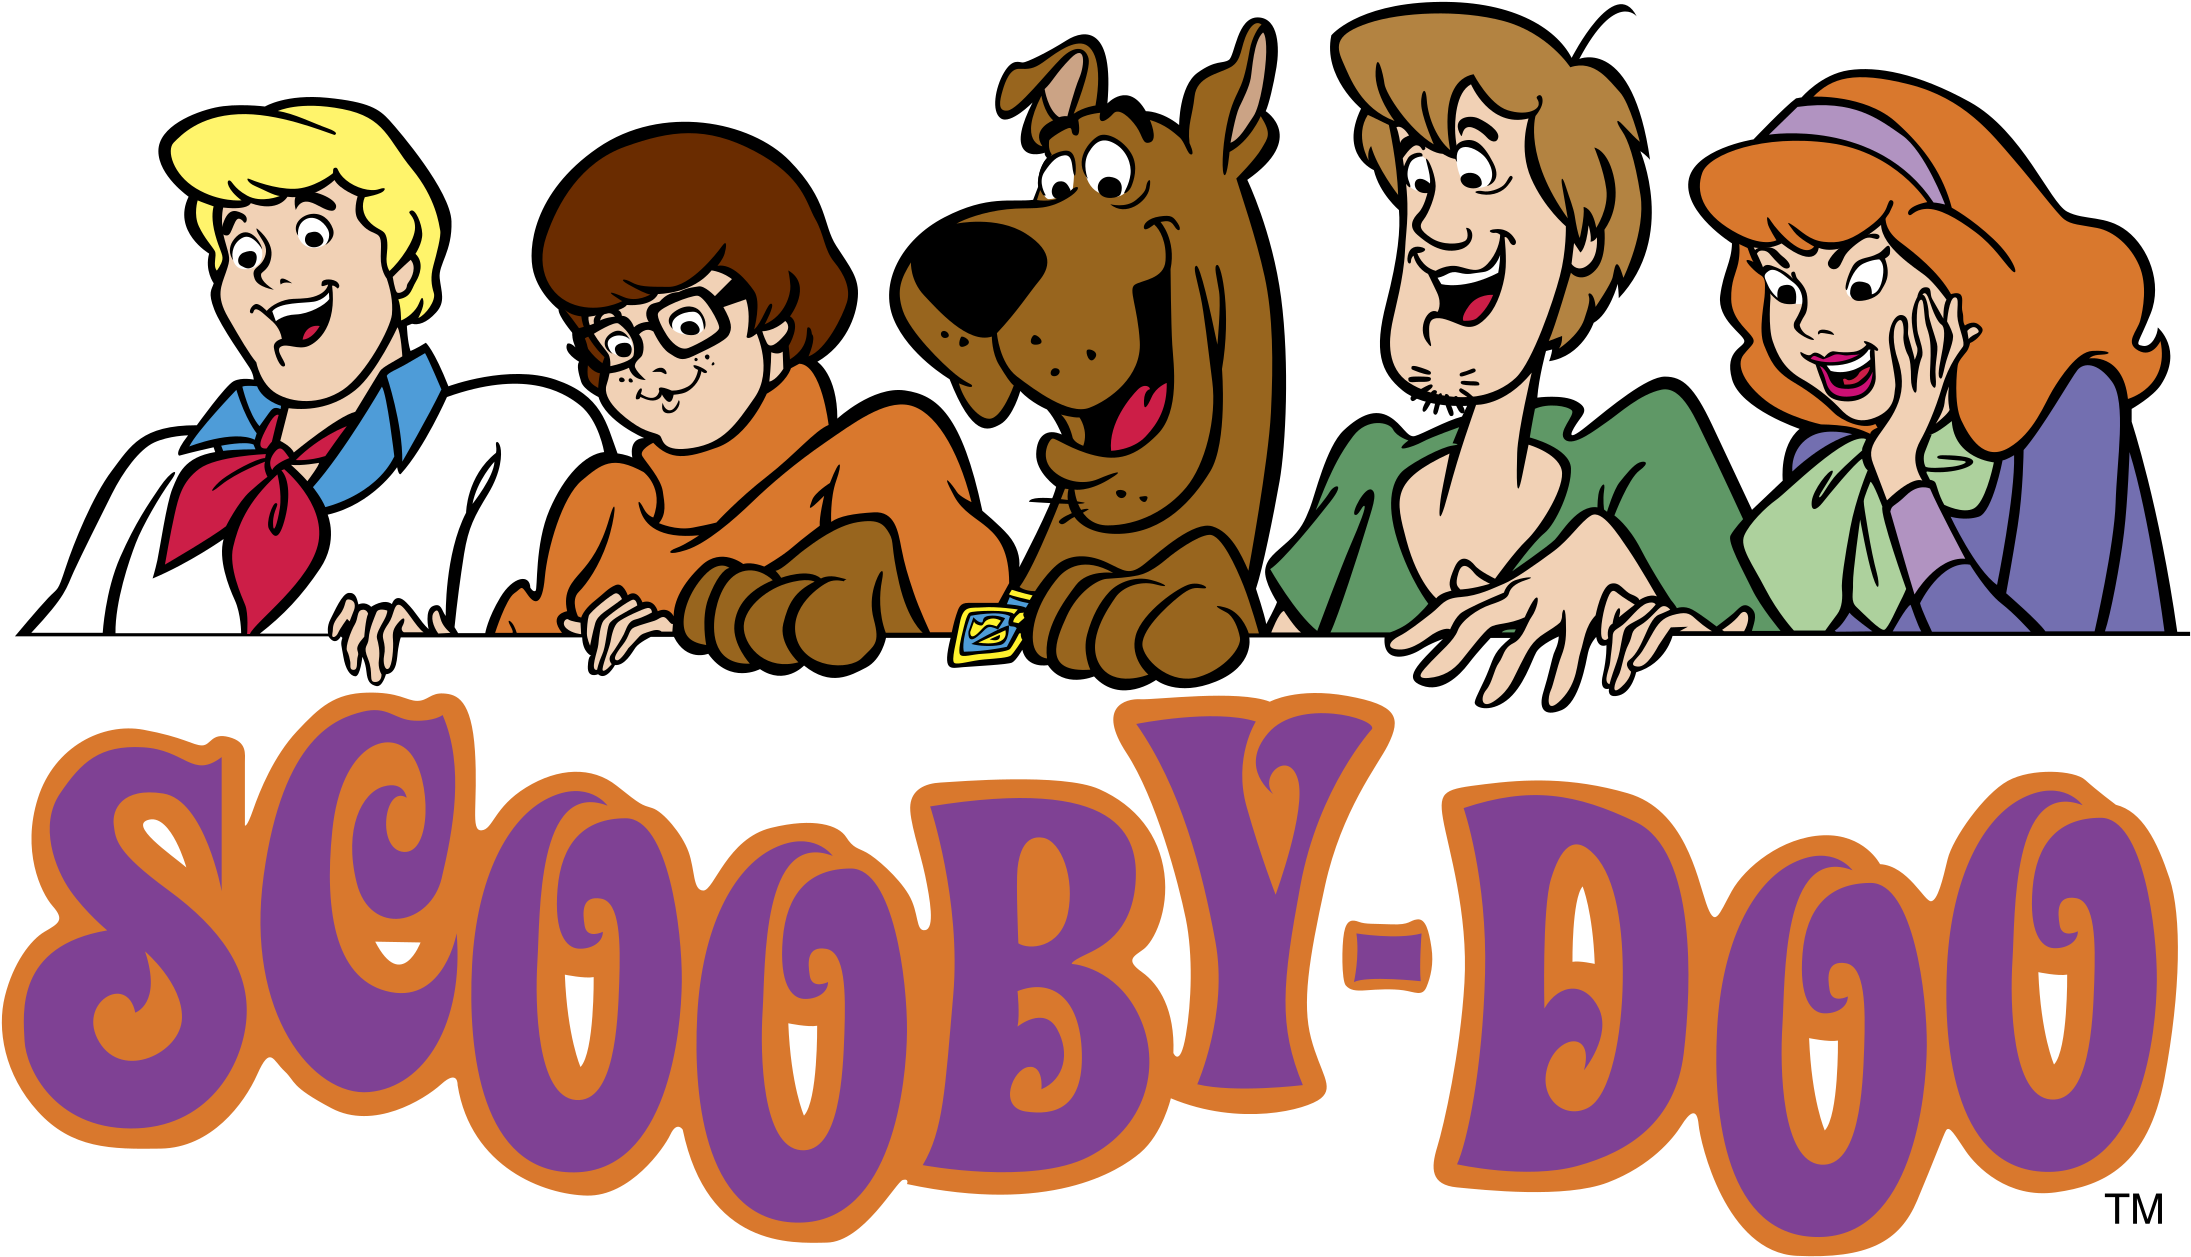 Download Scooby Doo Logo Png Transparent Scooby Doo Roblox Png